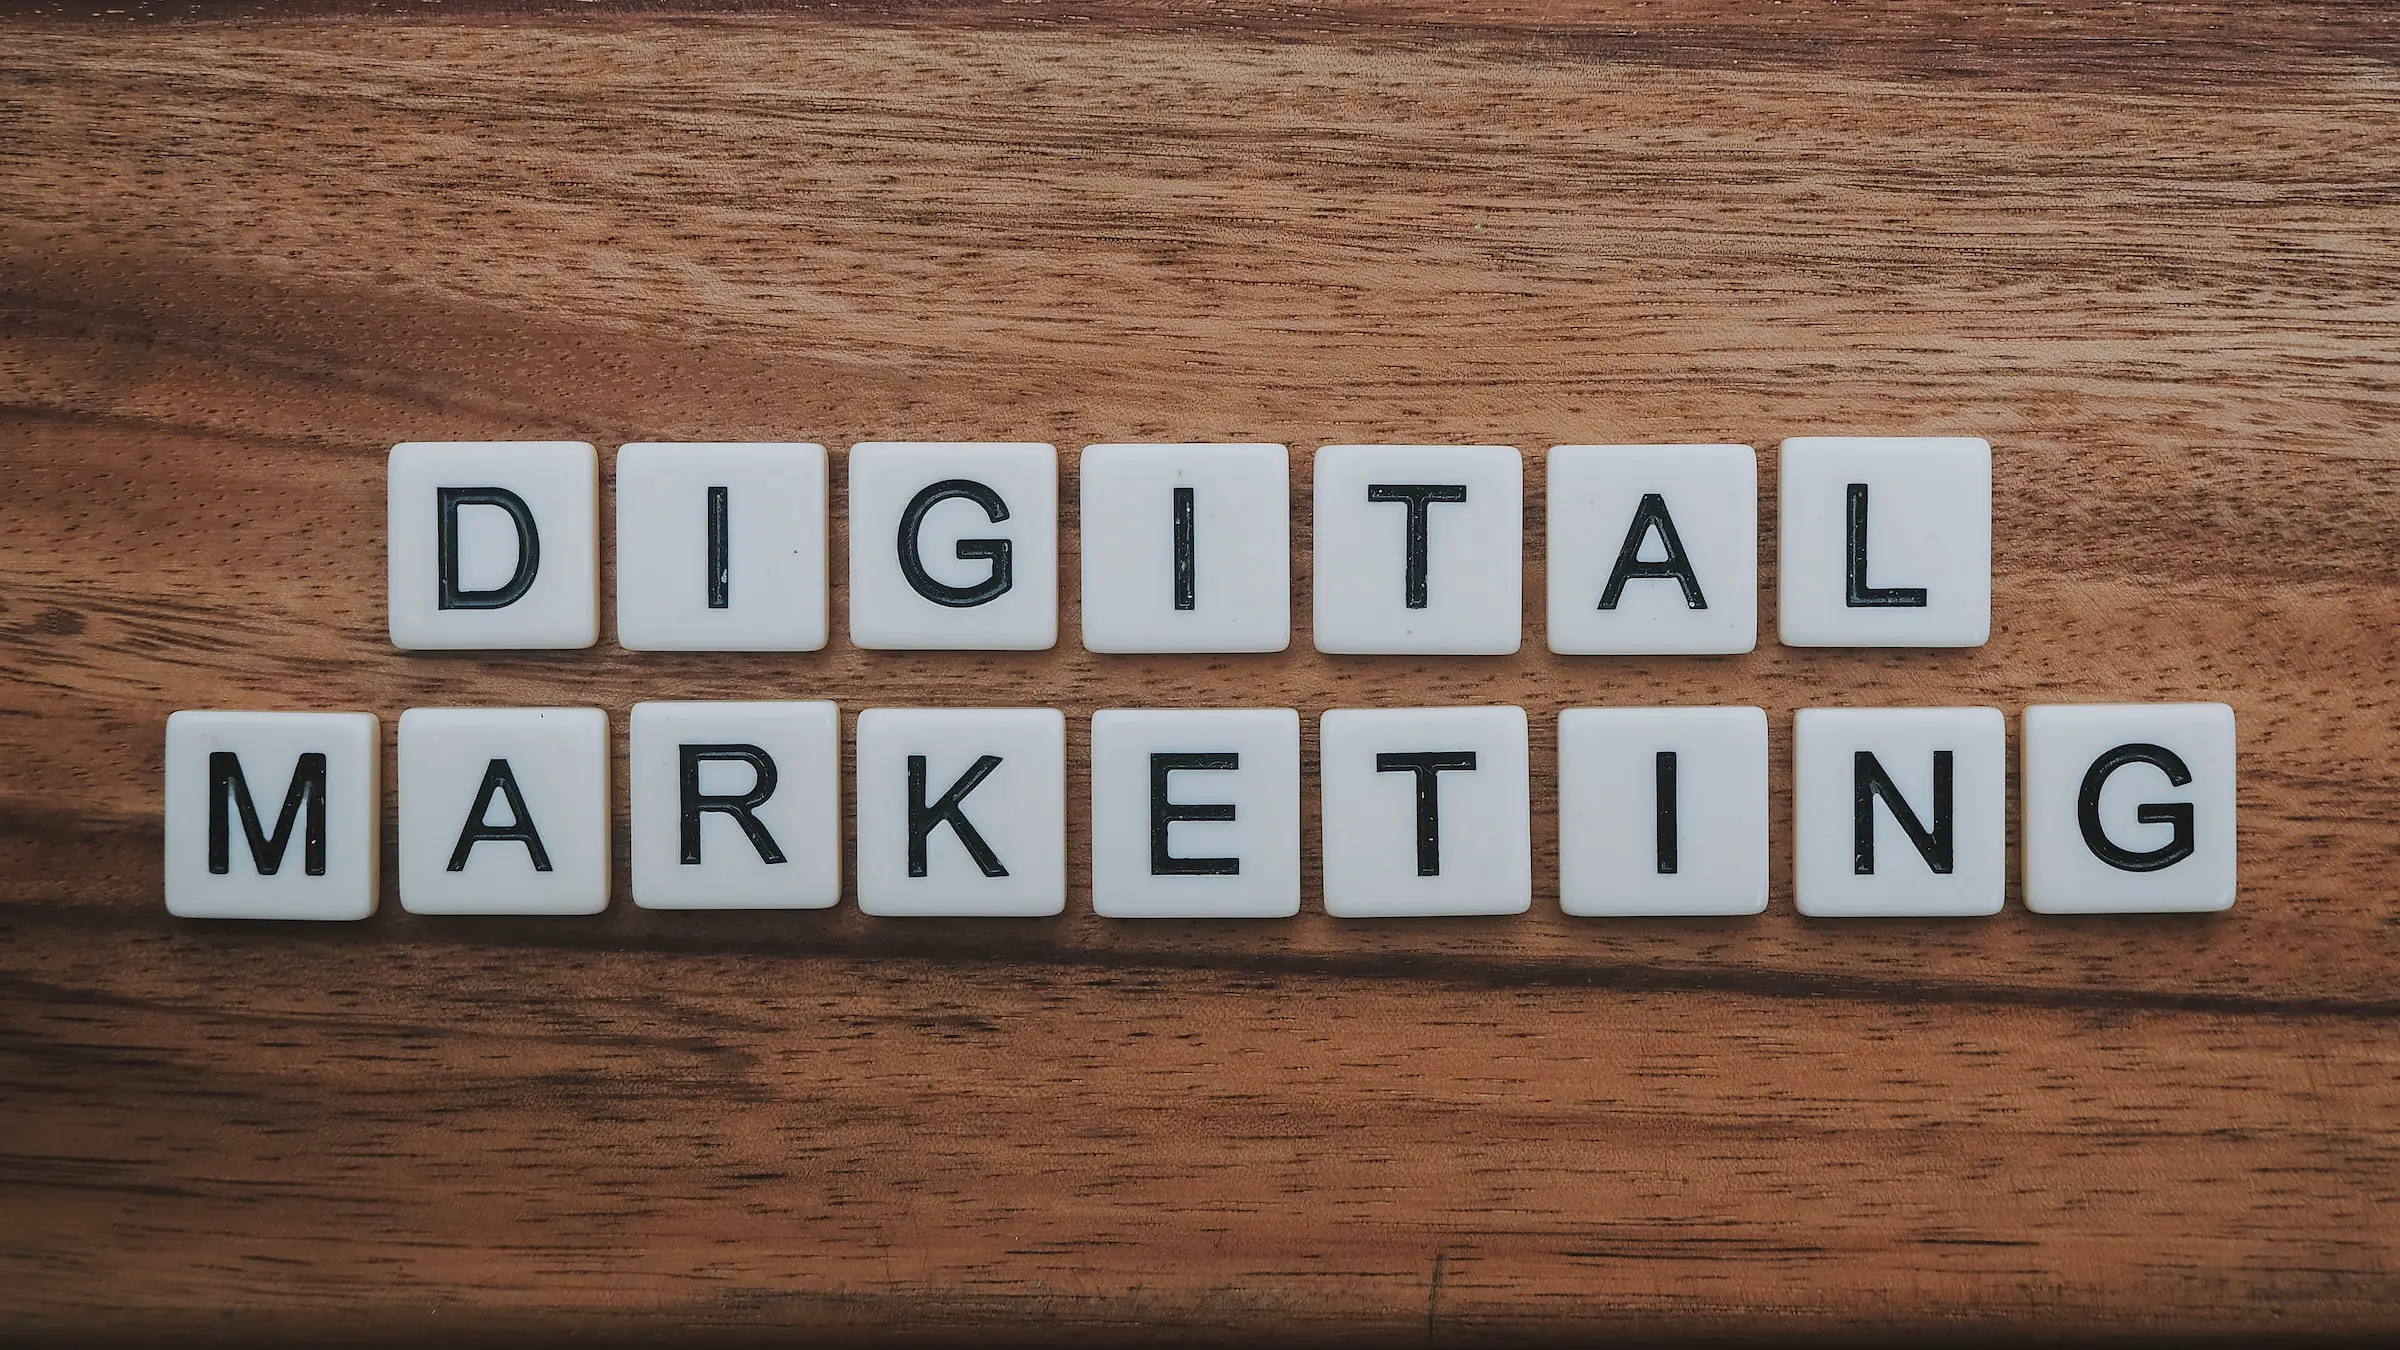 Digital marketing in the cubes